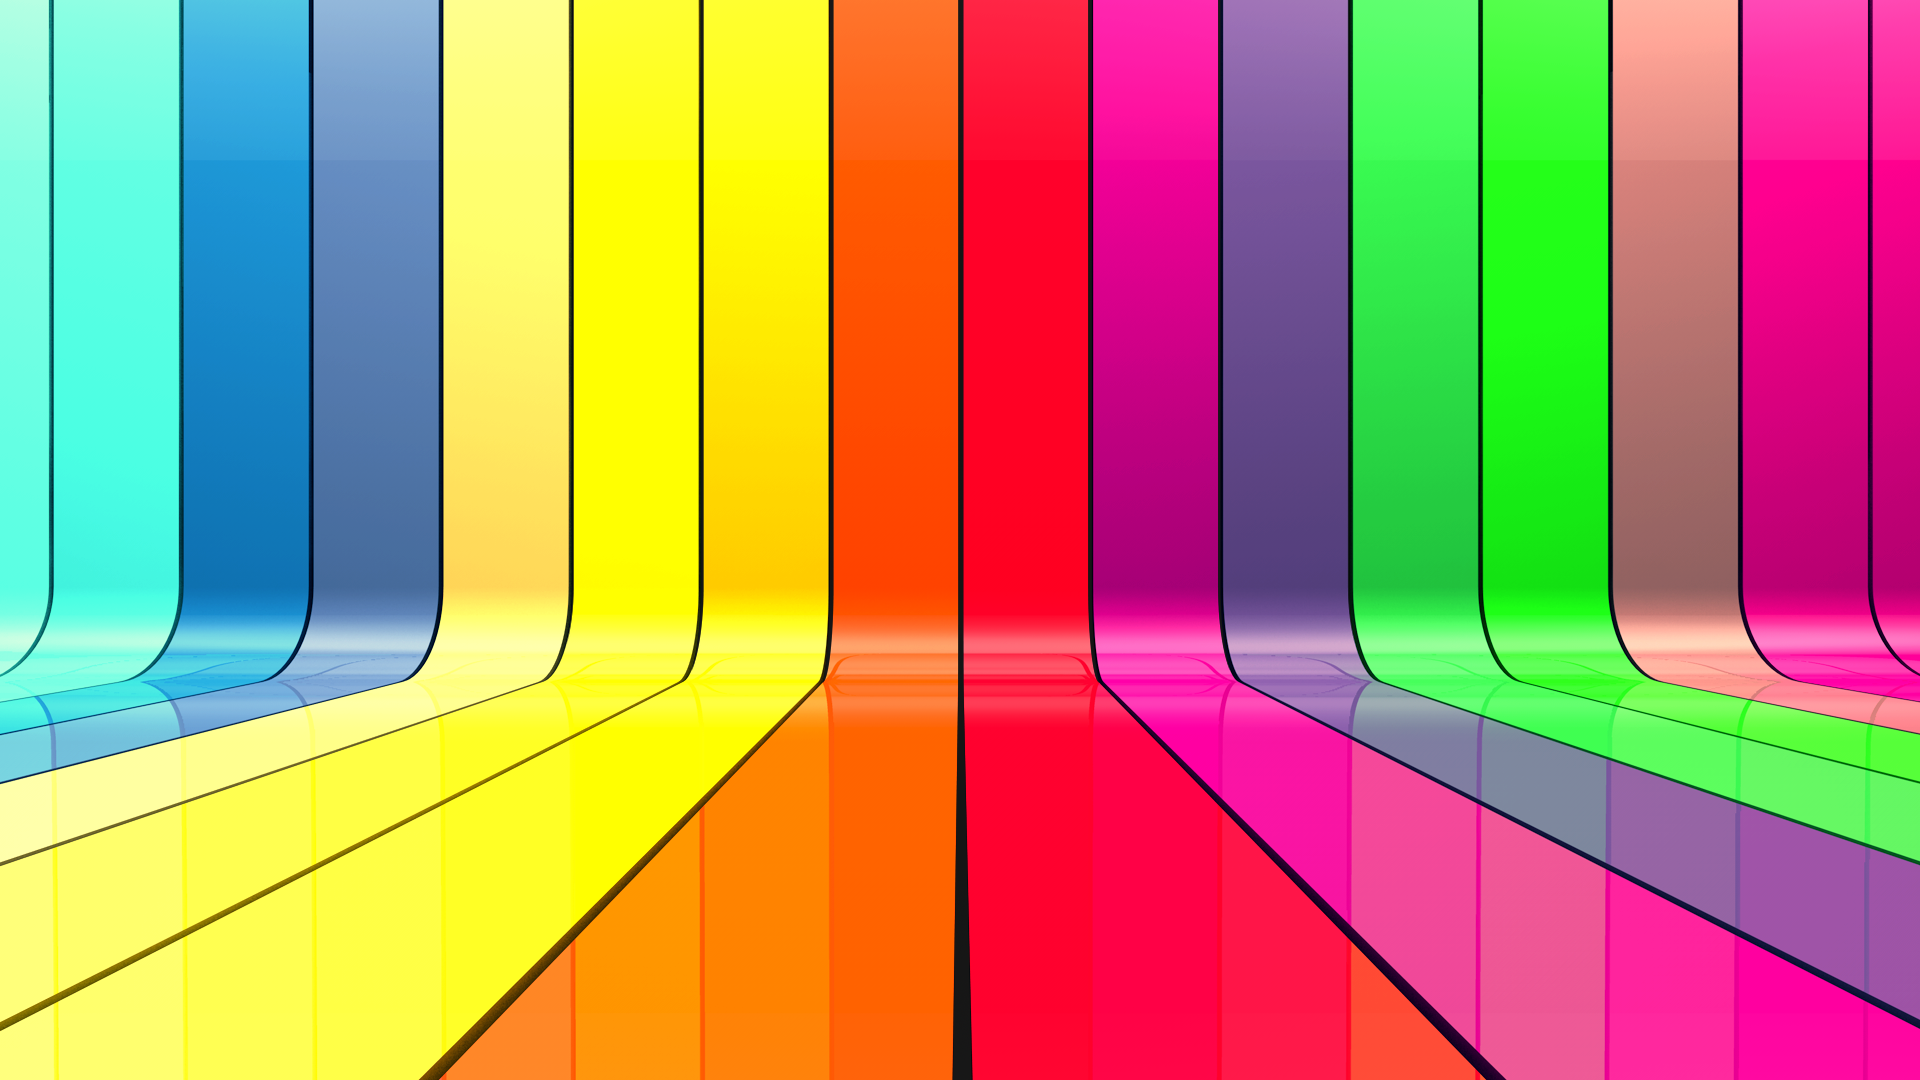 Red pink green yellow blue violet orange stripes background pictures